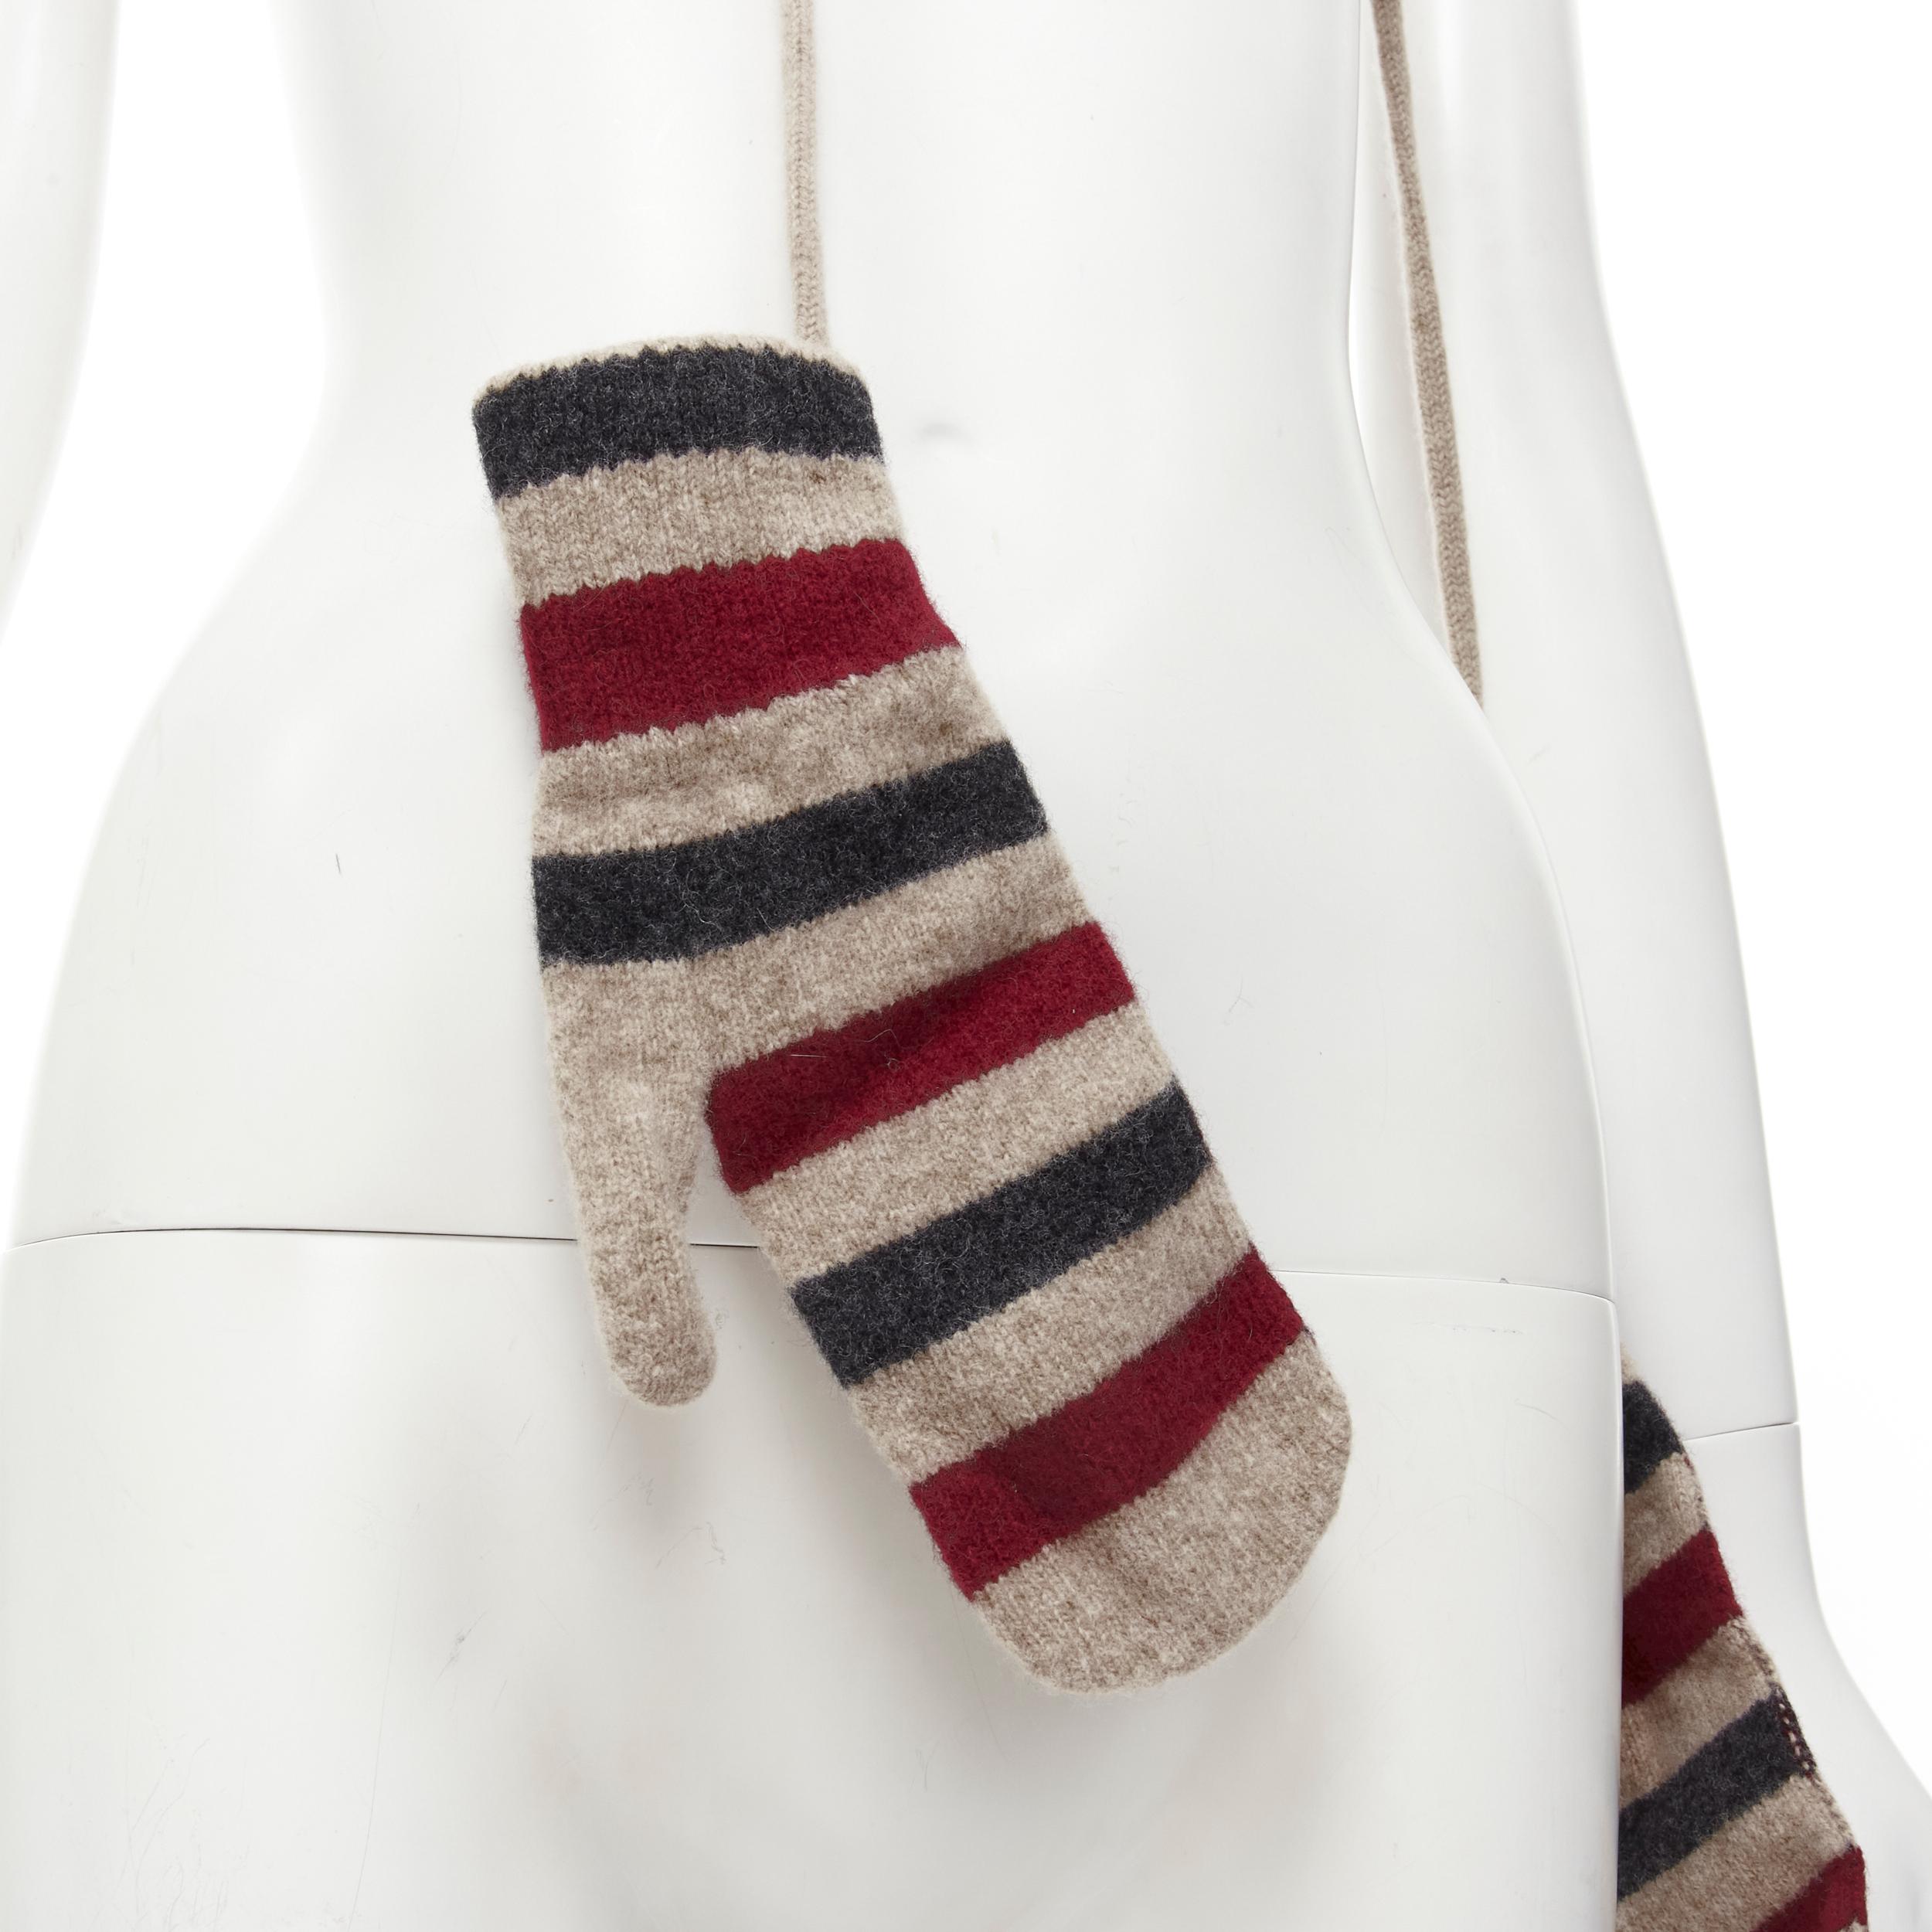 BURBERRY 100% lambs wool red black beige striped mitten glove on string 
Reference: MAWG/A00078 
Brand: Burberry 
Material: Wool 
Color: Beige 
Pattern: Stripe 
Made in: Scotland 

CONDITION: 
Condition: Excellent, this item was pre-owned and is in